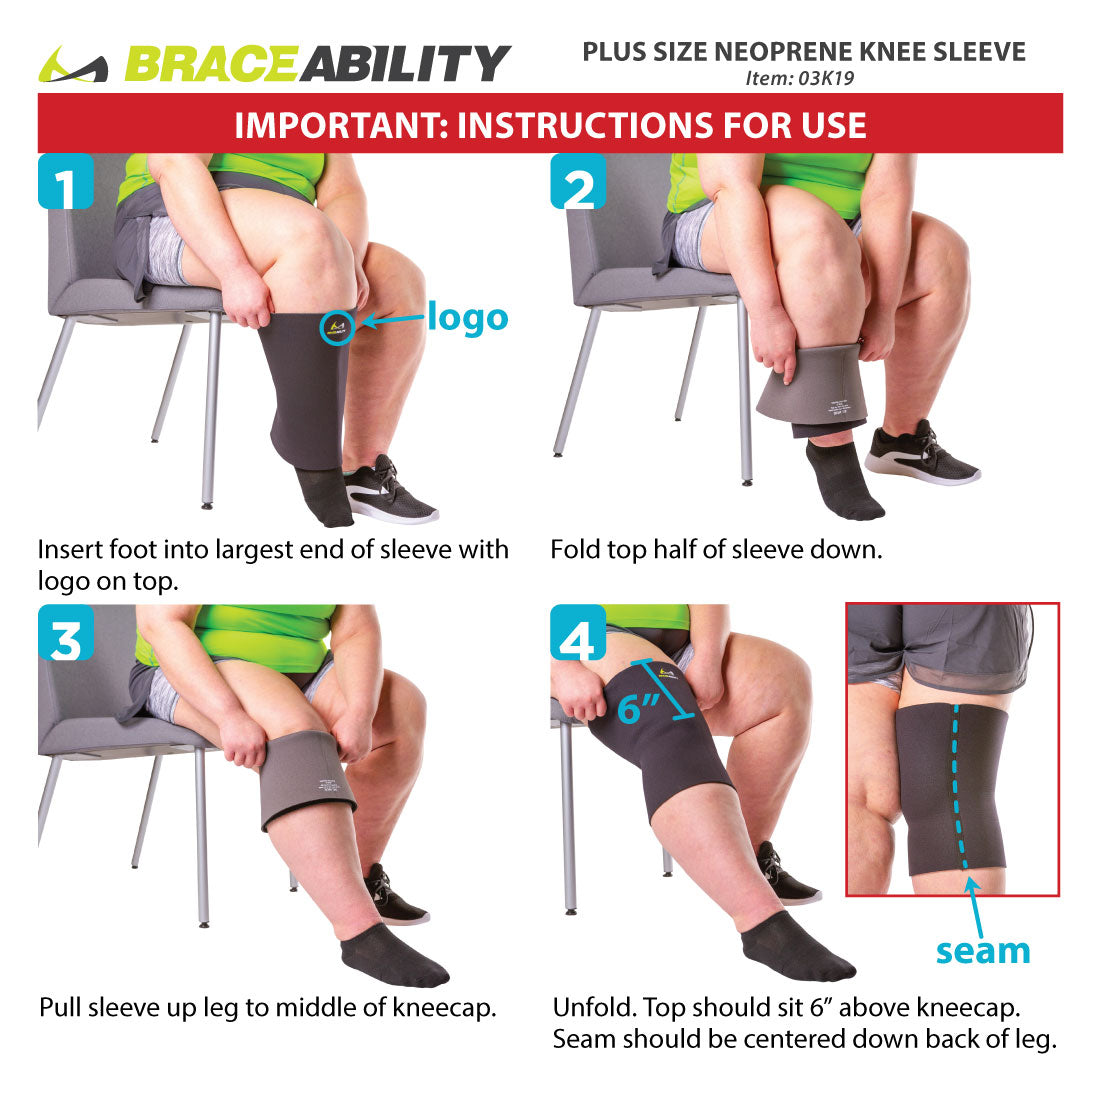 How to put on the neoprene compression knee sleeve instruction sheet